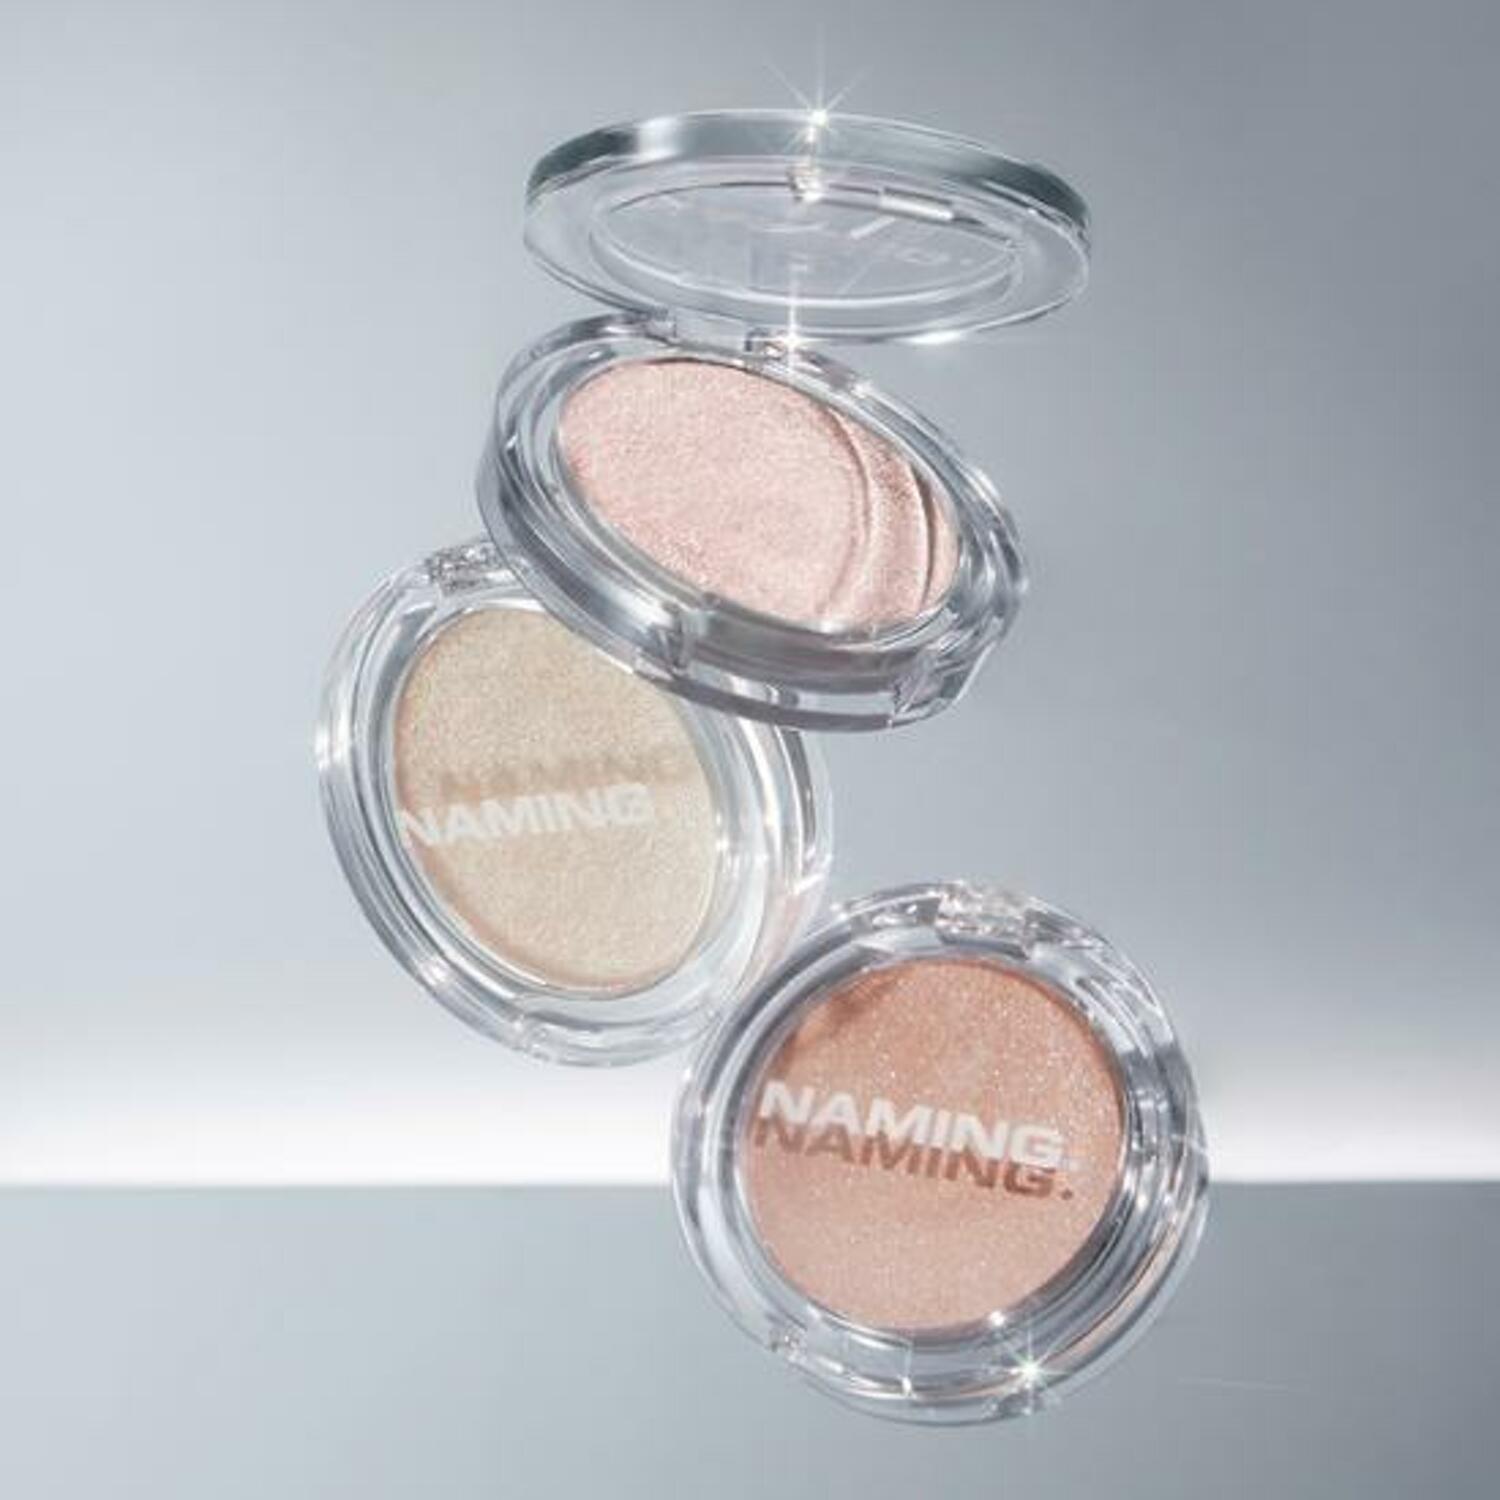 Compact 3.8g Fluffy Baked Highlighter for a radiant finish, ideal for enhancing your features.